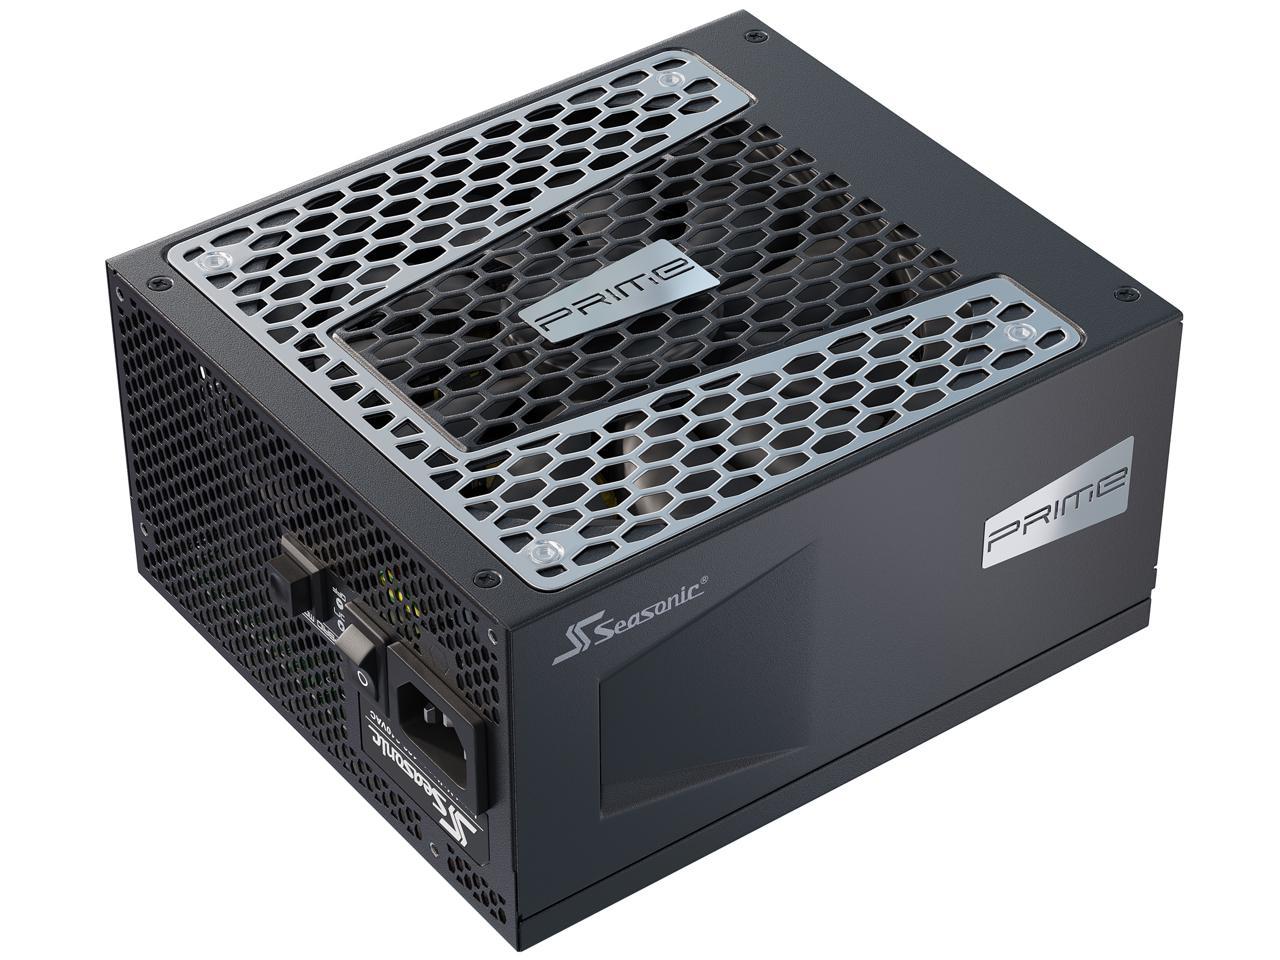 Seasonic PRIME GX-850, 850W 80+ Gold, Full Modular, Fan Control in Fanless, Silent, and Cooling Mode, 12 Year Warranty, Perfect Power Supply for Gaming and High-Performance Systems, SSR-850GD.